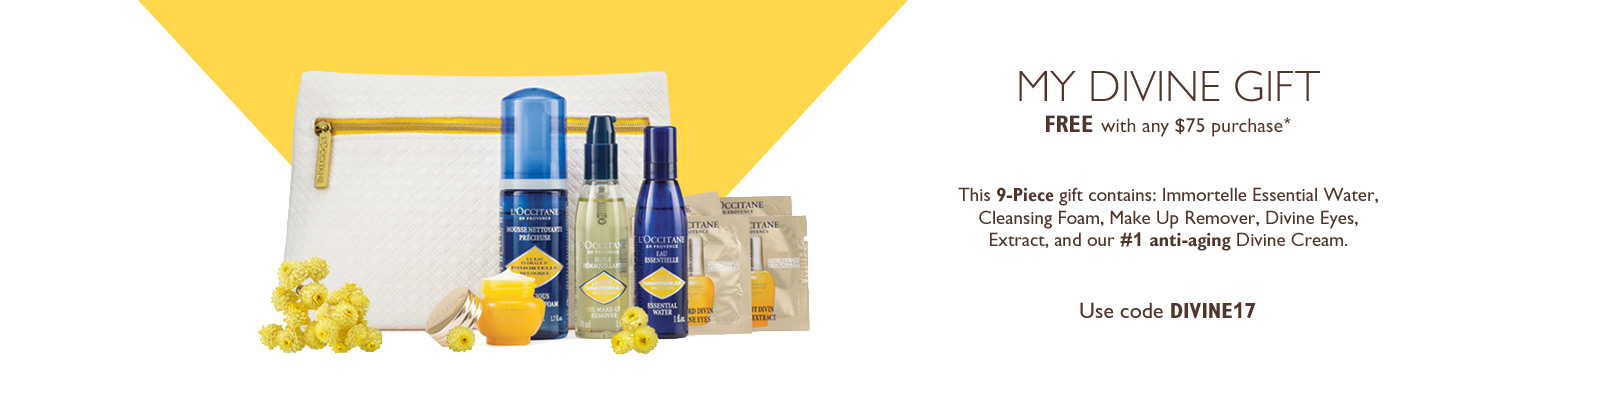 Receive a free 9- piece bonus gift with your $75 L'Occitane purchase